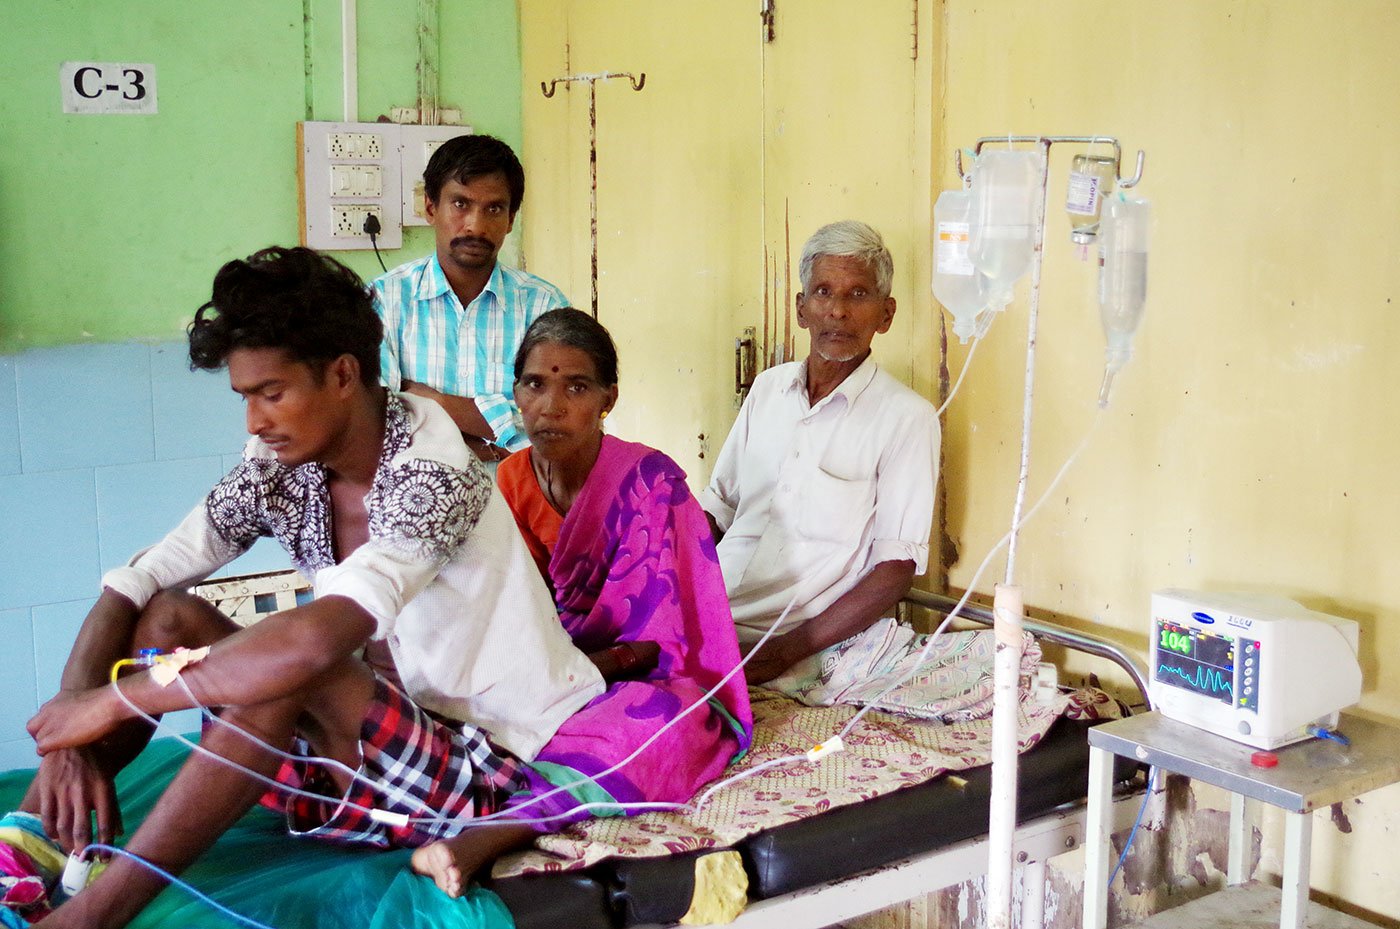 Nikesh Kathane, a 21-year-old farm labourer, recuperating in the ICU of the Yavatmal Government Medical College and Hospital in September 2017, after falling sick in the wake of accidental inhalation of pesticide while spraying it on his owner’s field. With him are his parents Keshavrao and Tarabai and his elder brother Laxman